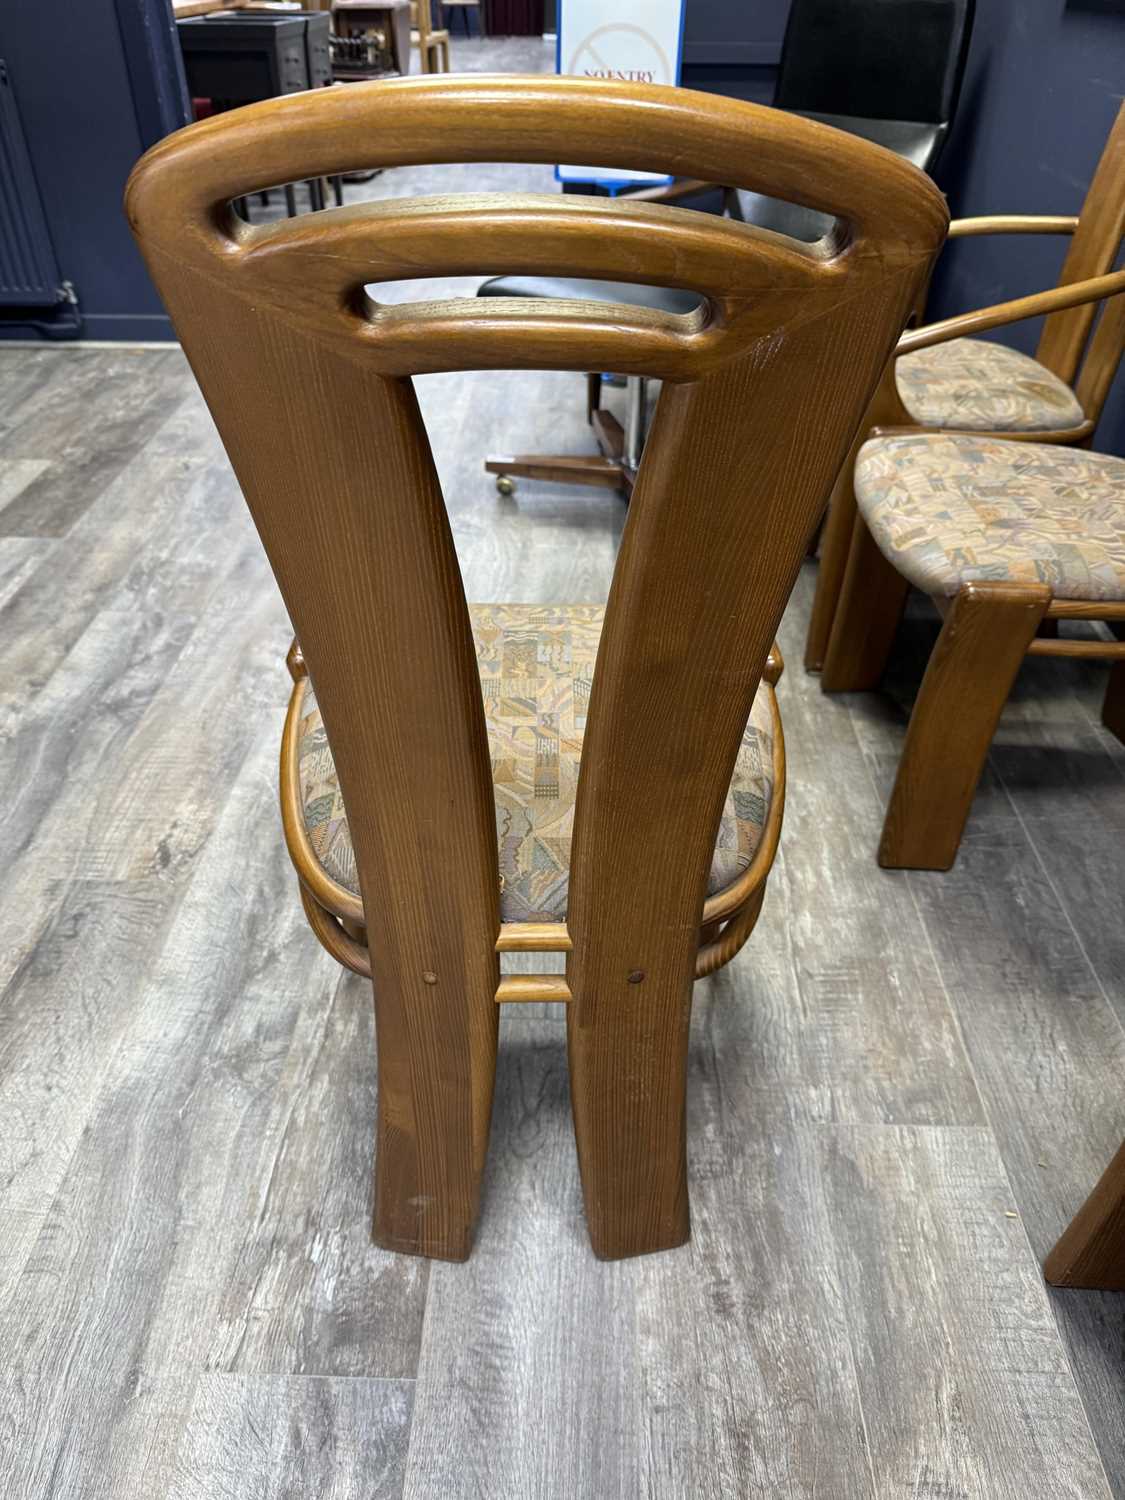 BOLTINGE OF DENMARK, SET OF SIX POST-MODERN TEAK DINING CHAIRS, CIRCA 1980s - Image 12 of 16